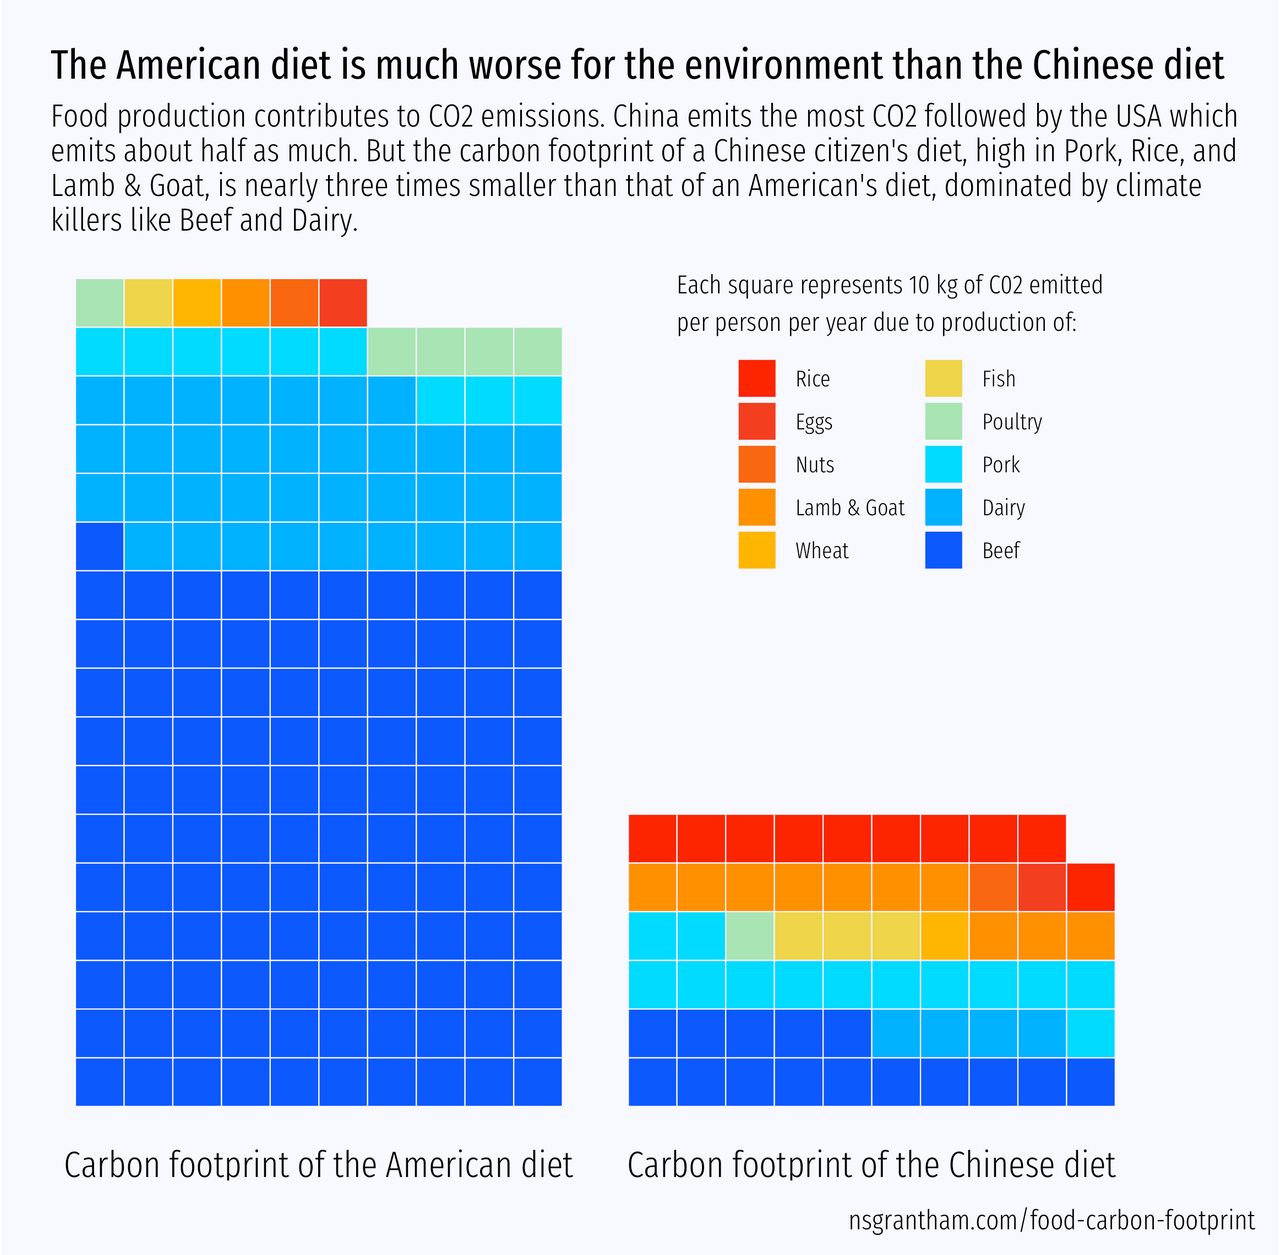 Carbon Footprint of Food Production